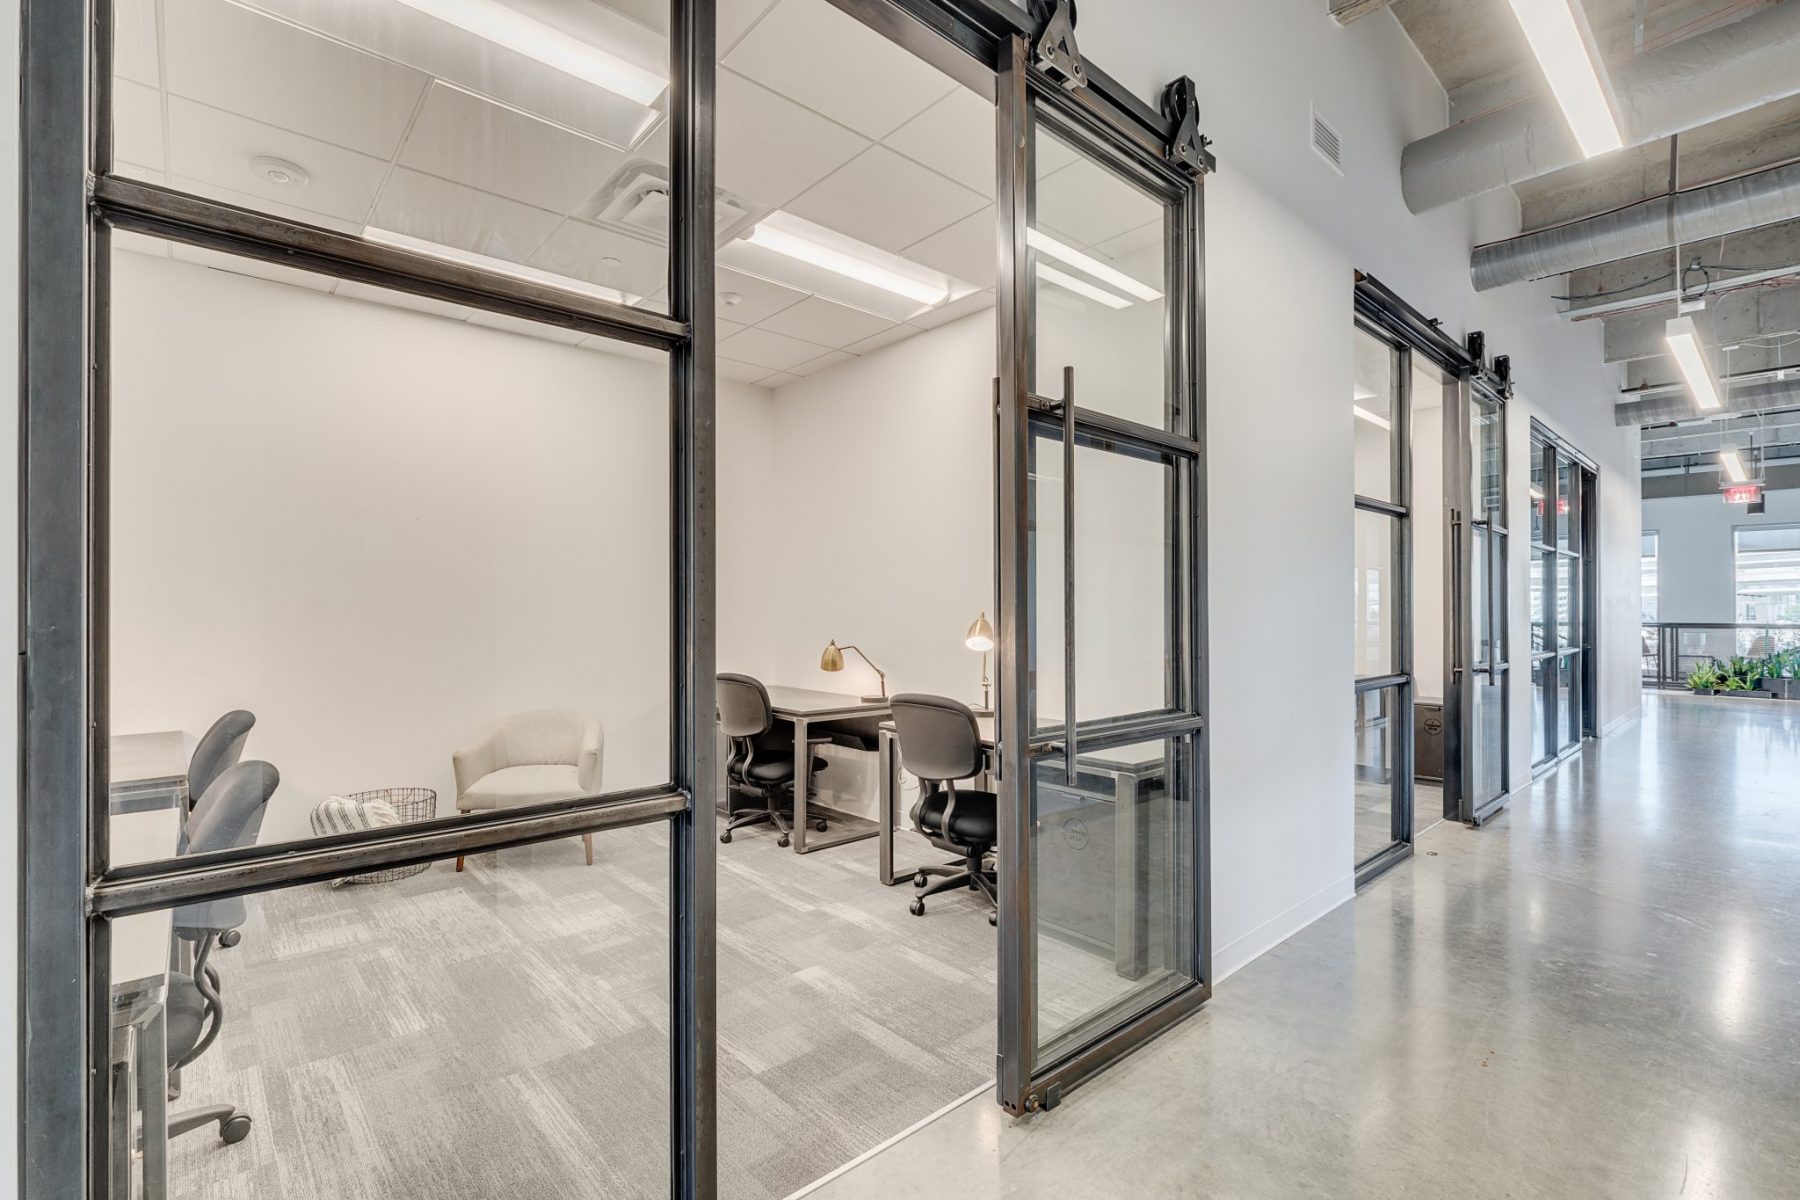 Private offices for growing teams